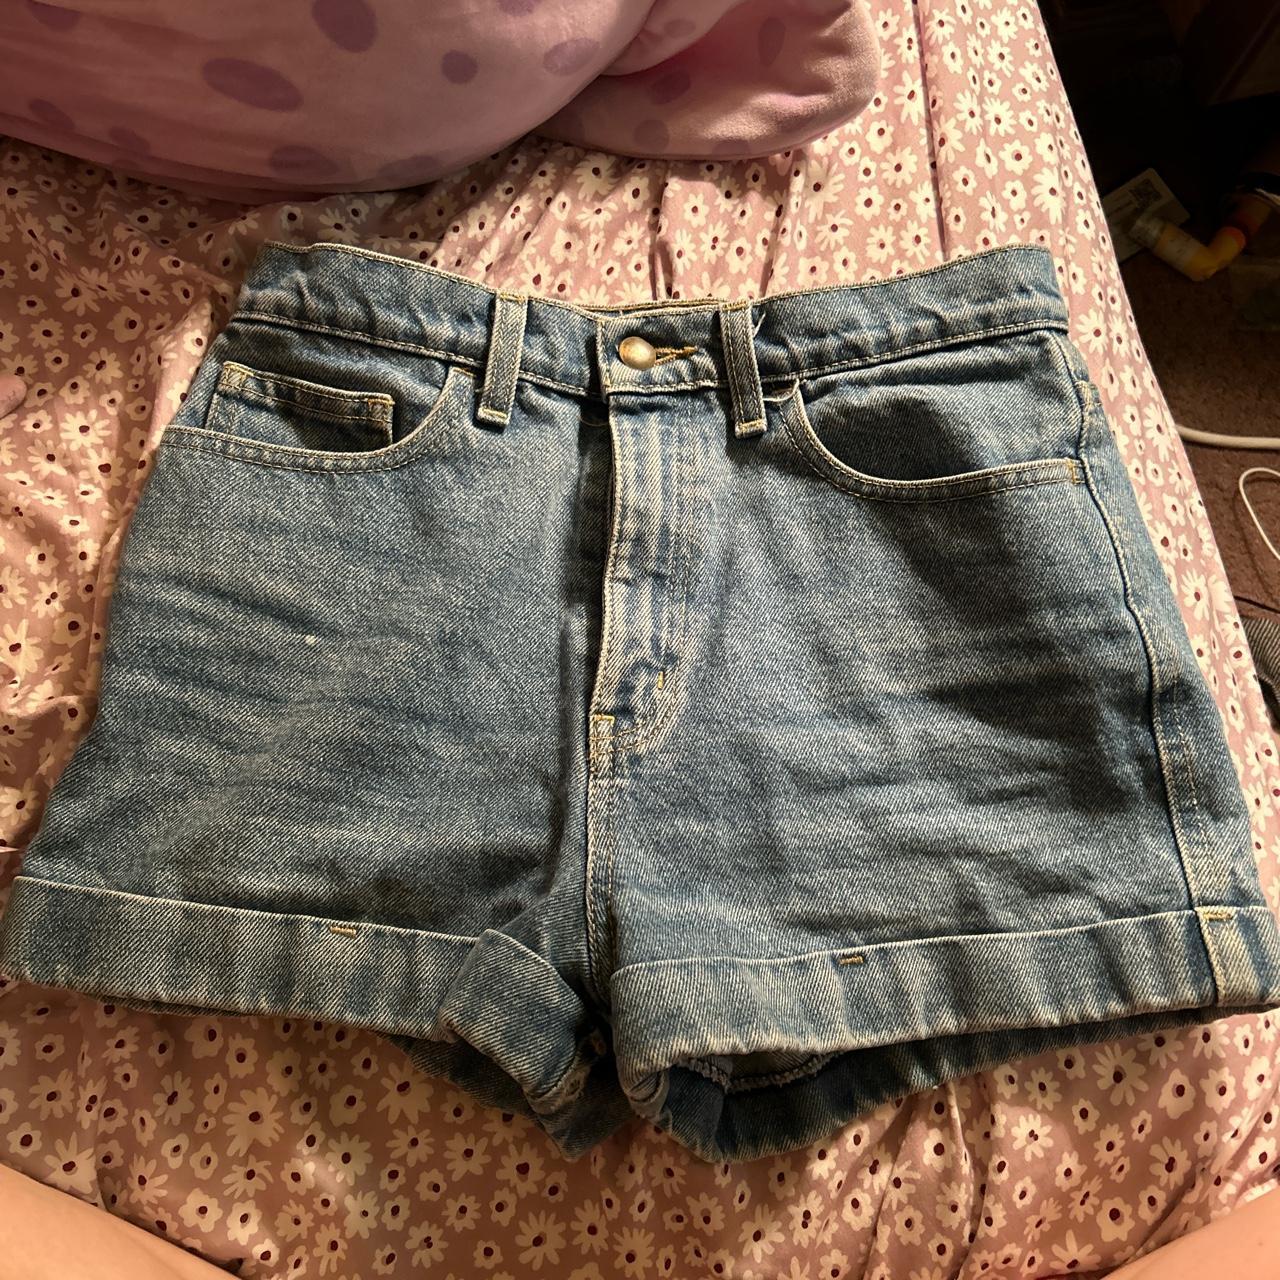 American Apparel Women's Blue and Navy Shorts (3)